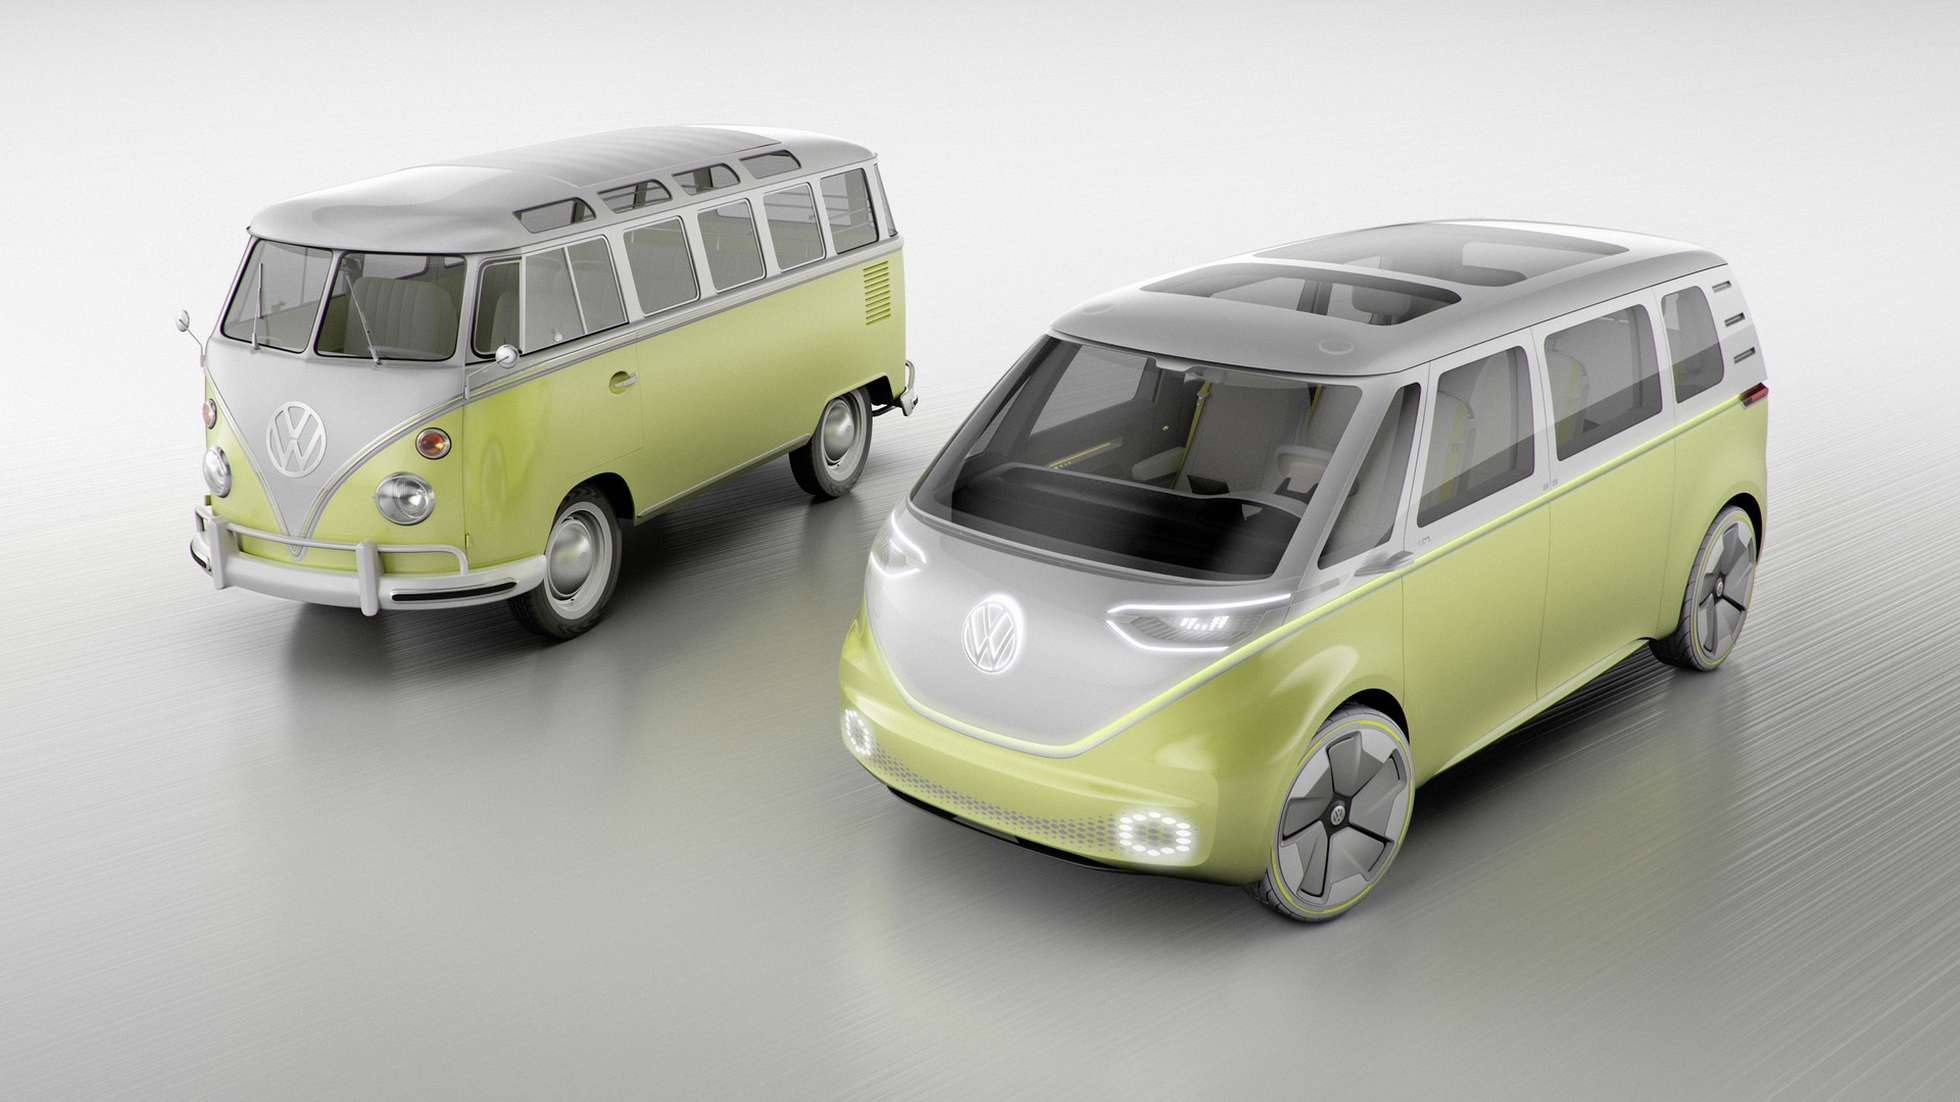 The Volkswagen van is back. It will be electric and self-driving